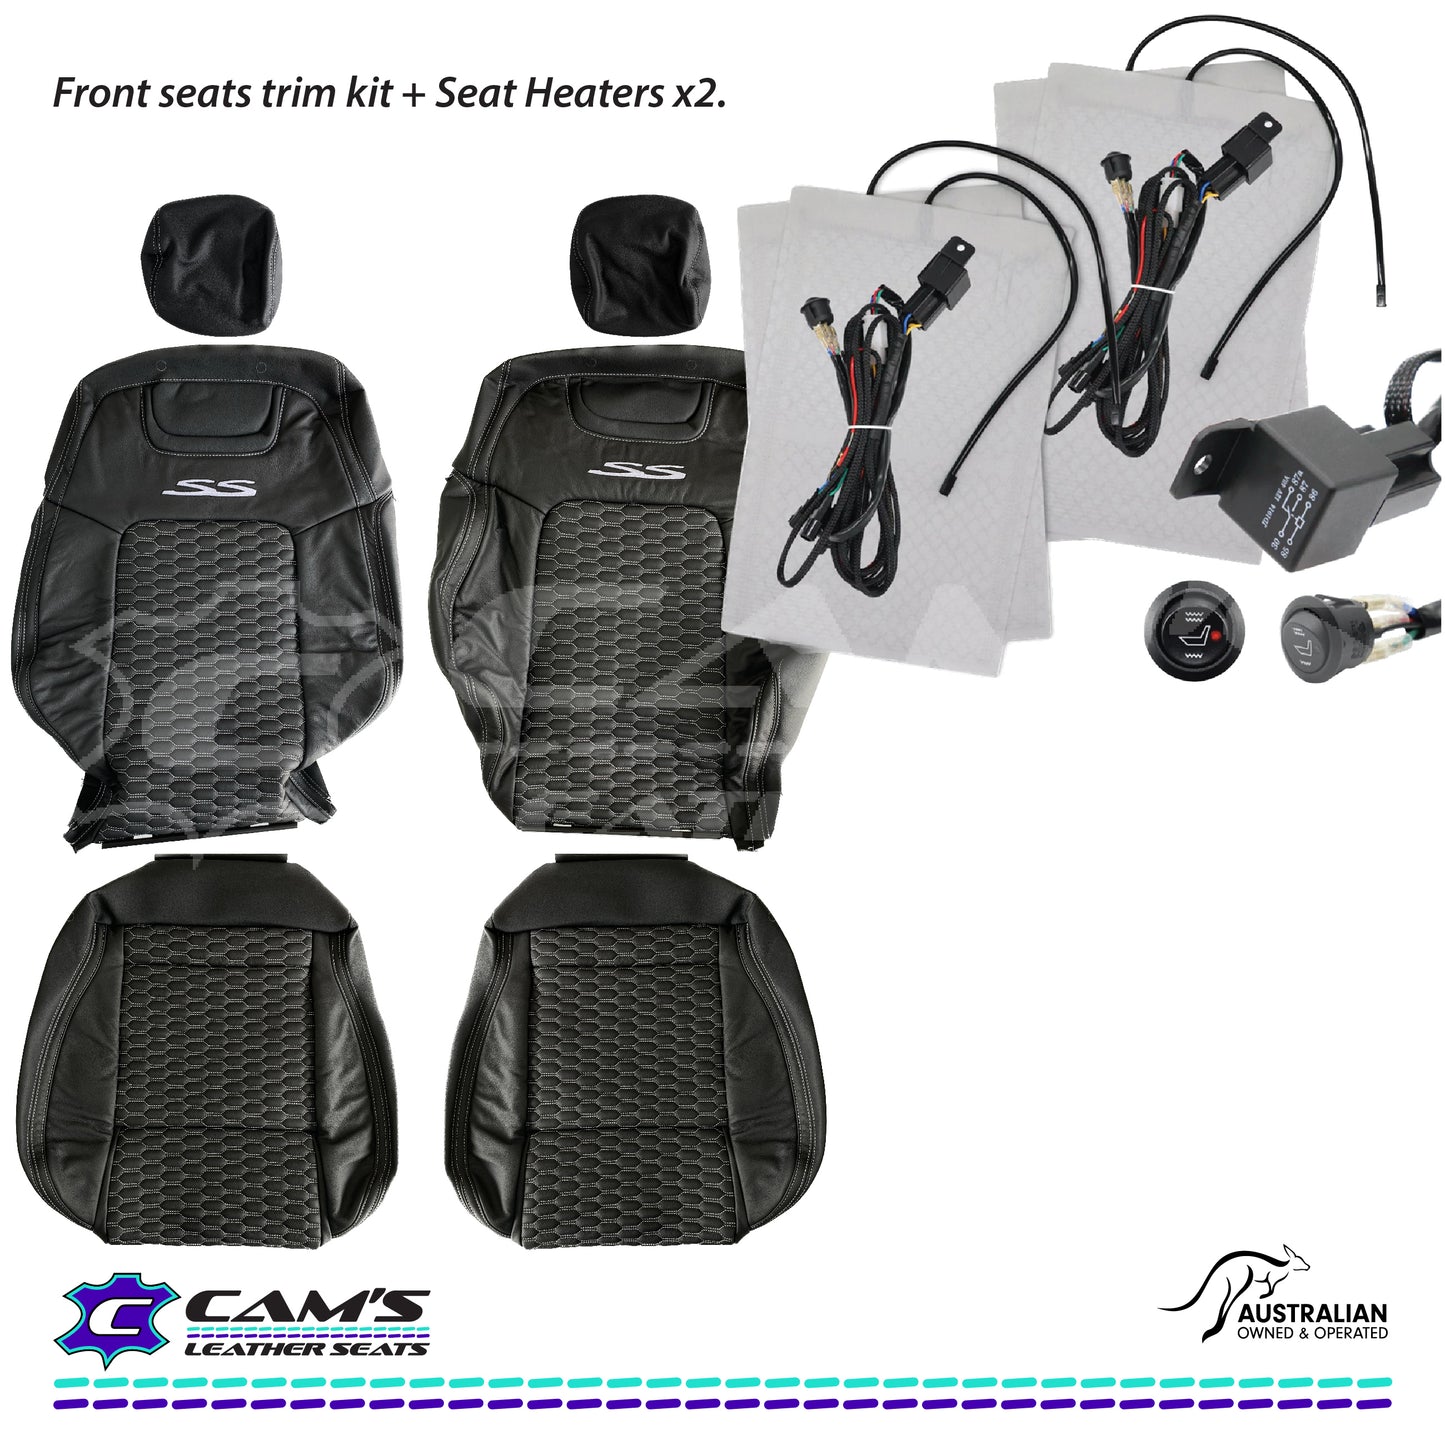 LEATHER SEATS TRIM KIT FOR VE SS 2 FRONT SEATS OR UTE ONYX & SILVER HEXAGON